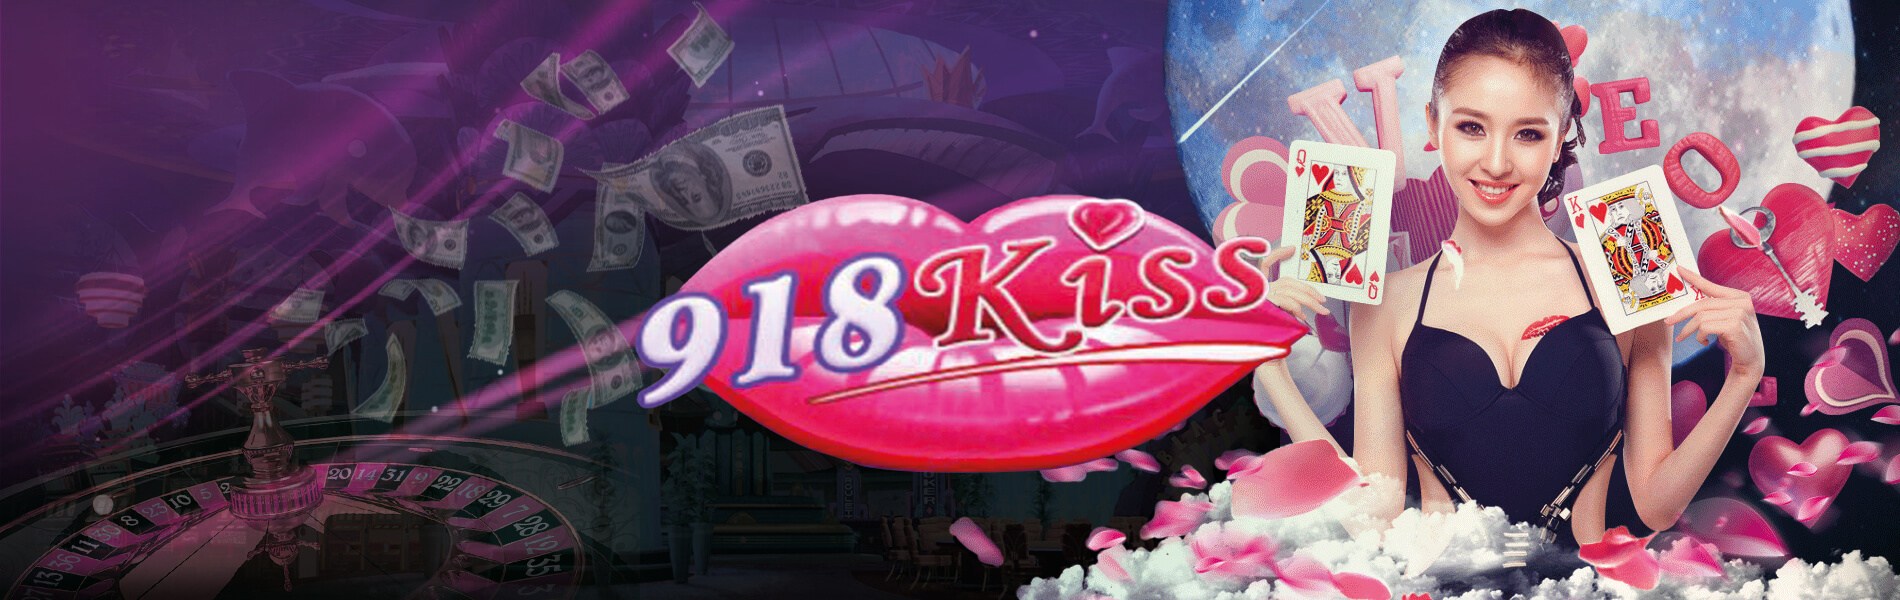 Where to Find 918kiss Online Casino Malaysia